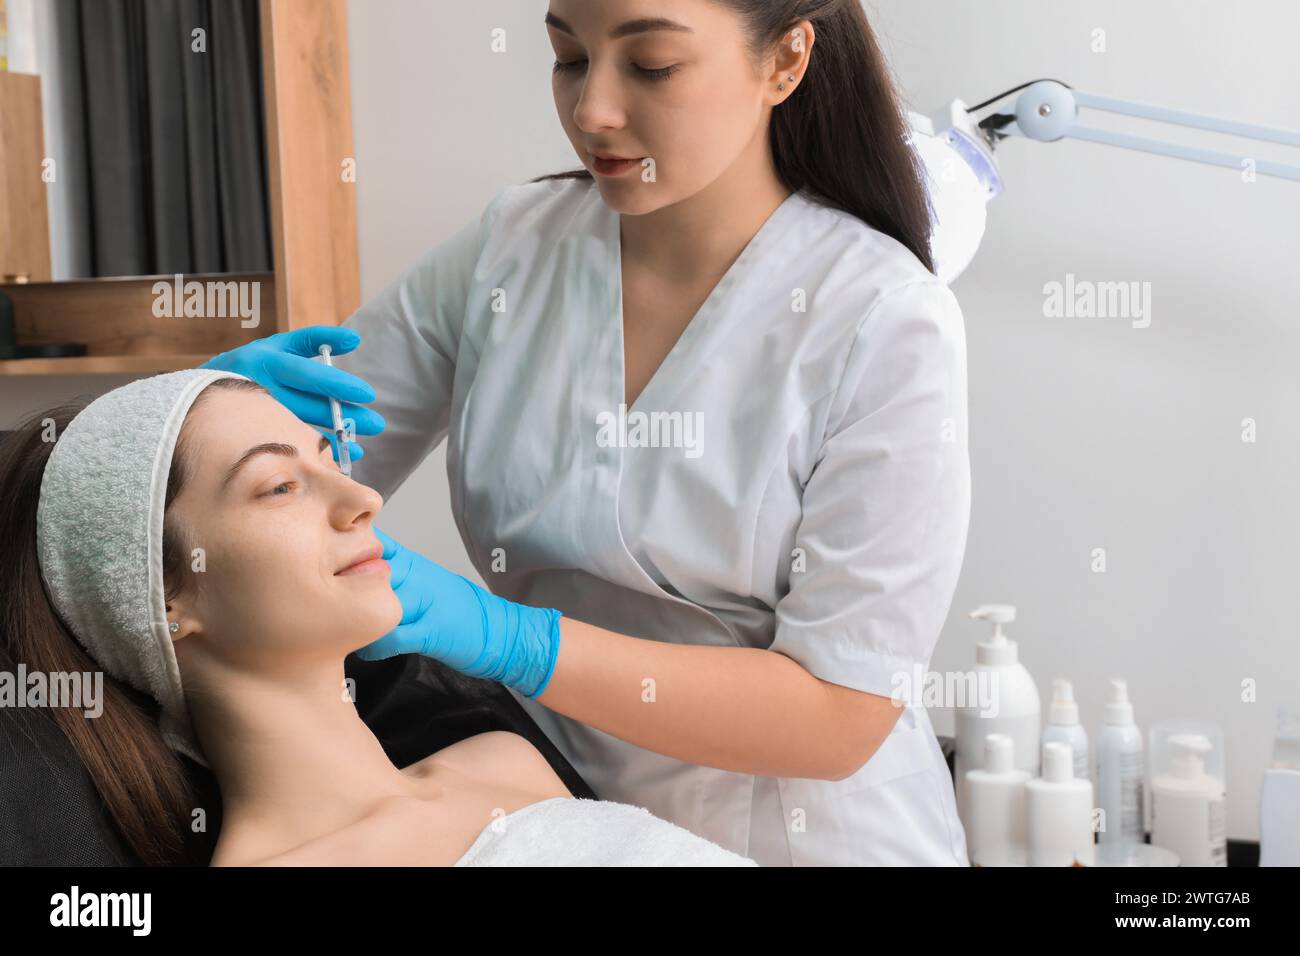 Cosmetologist giving facial injection to patient in clinic. Cosmetic surgery Stock Photo